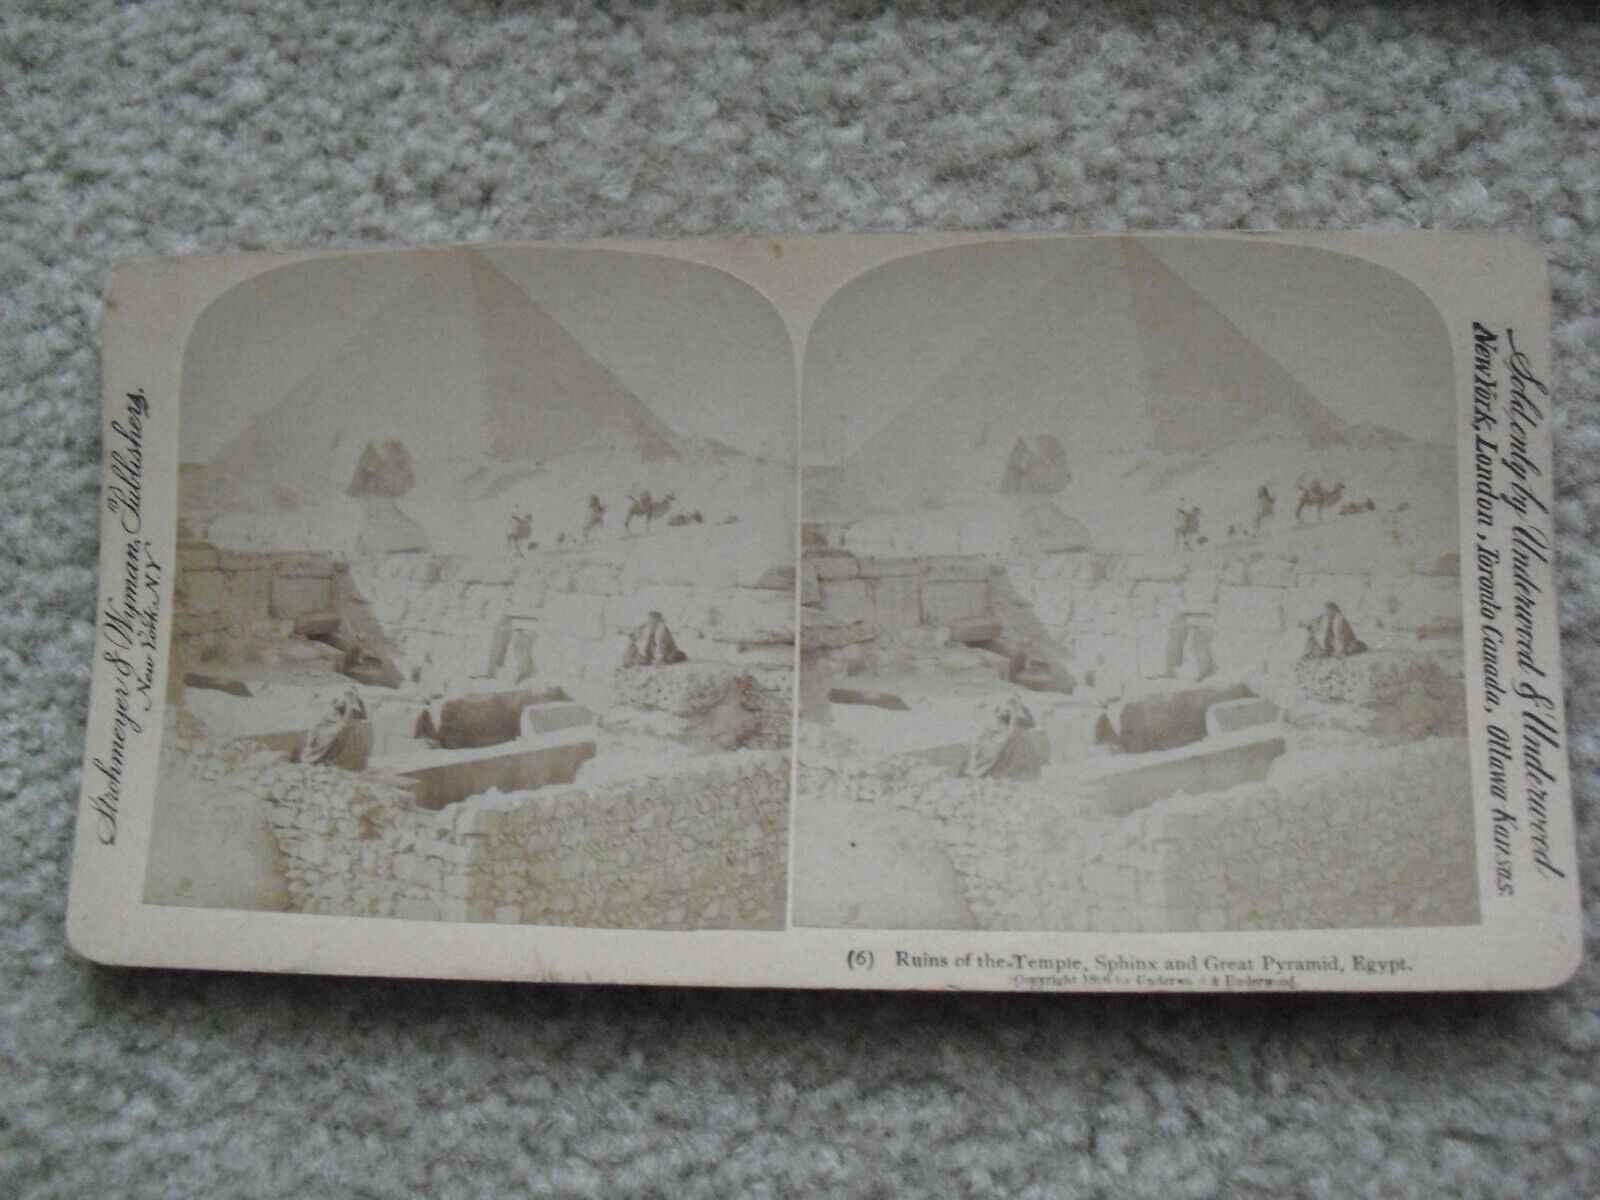 Vintage c1896 Stereoview Card Underwood Egypt Ruins of the Temple Spinx Pyramid